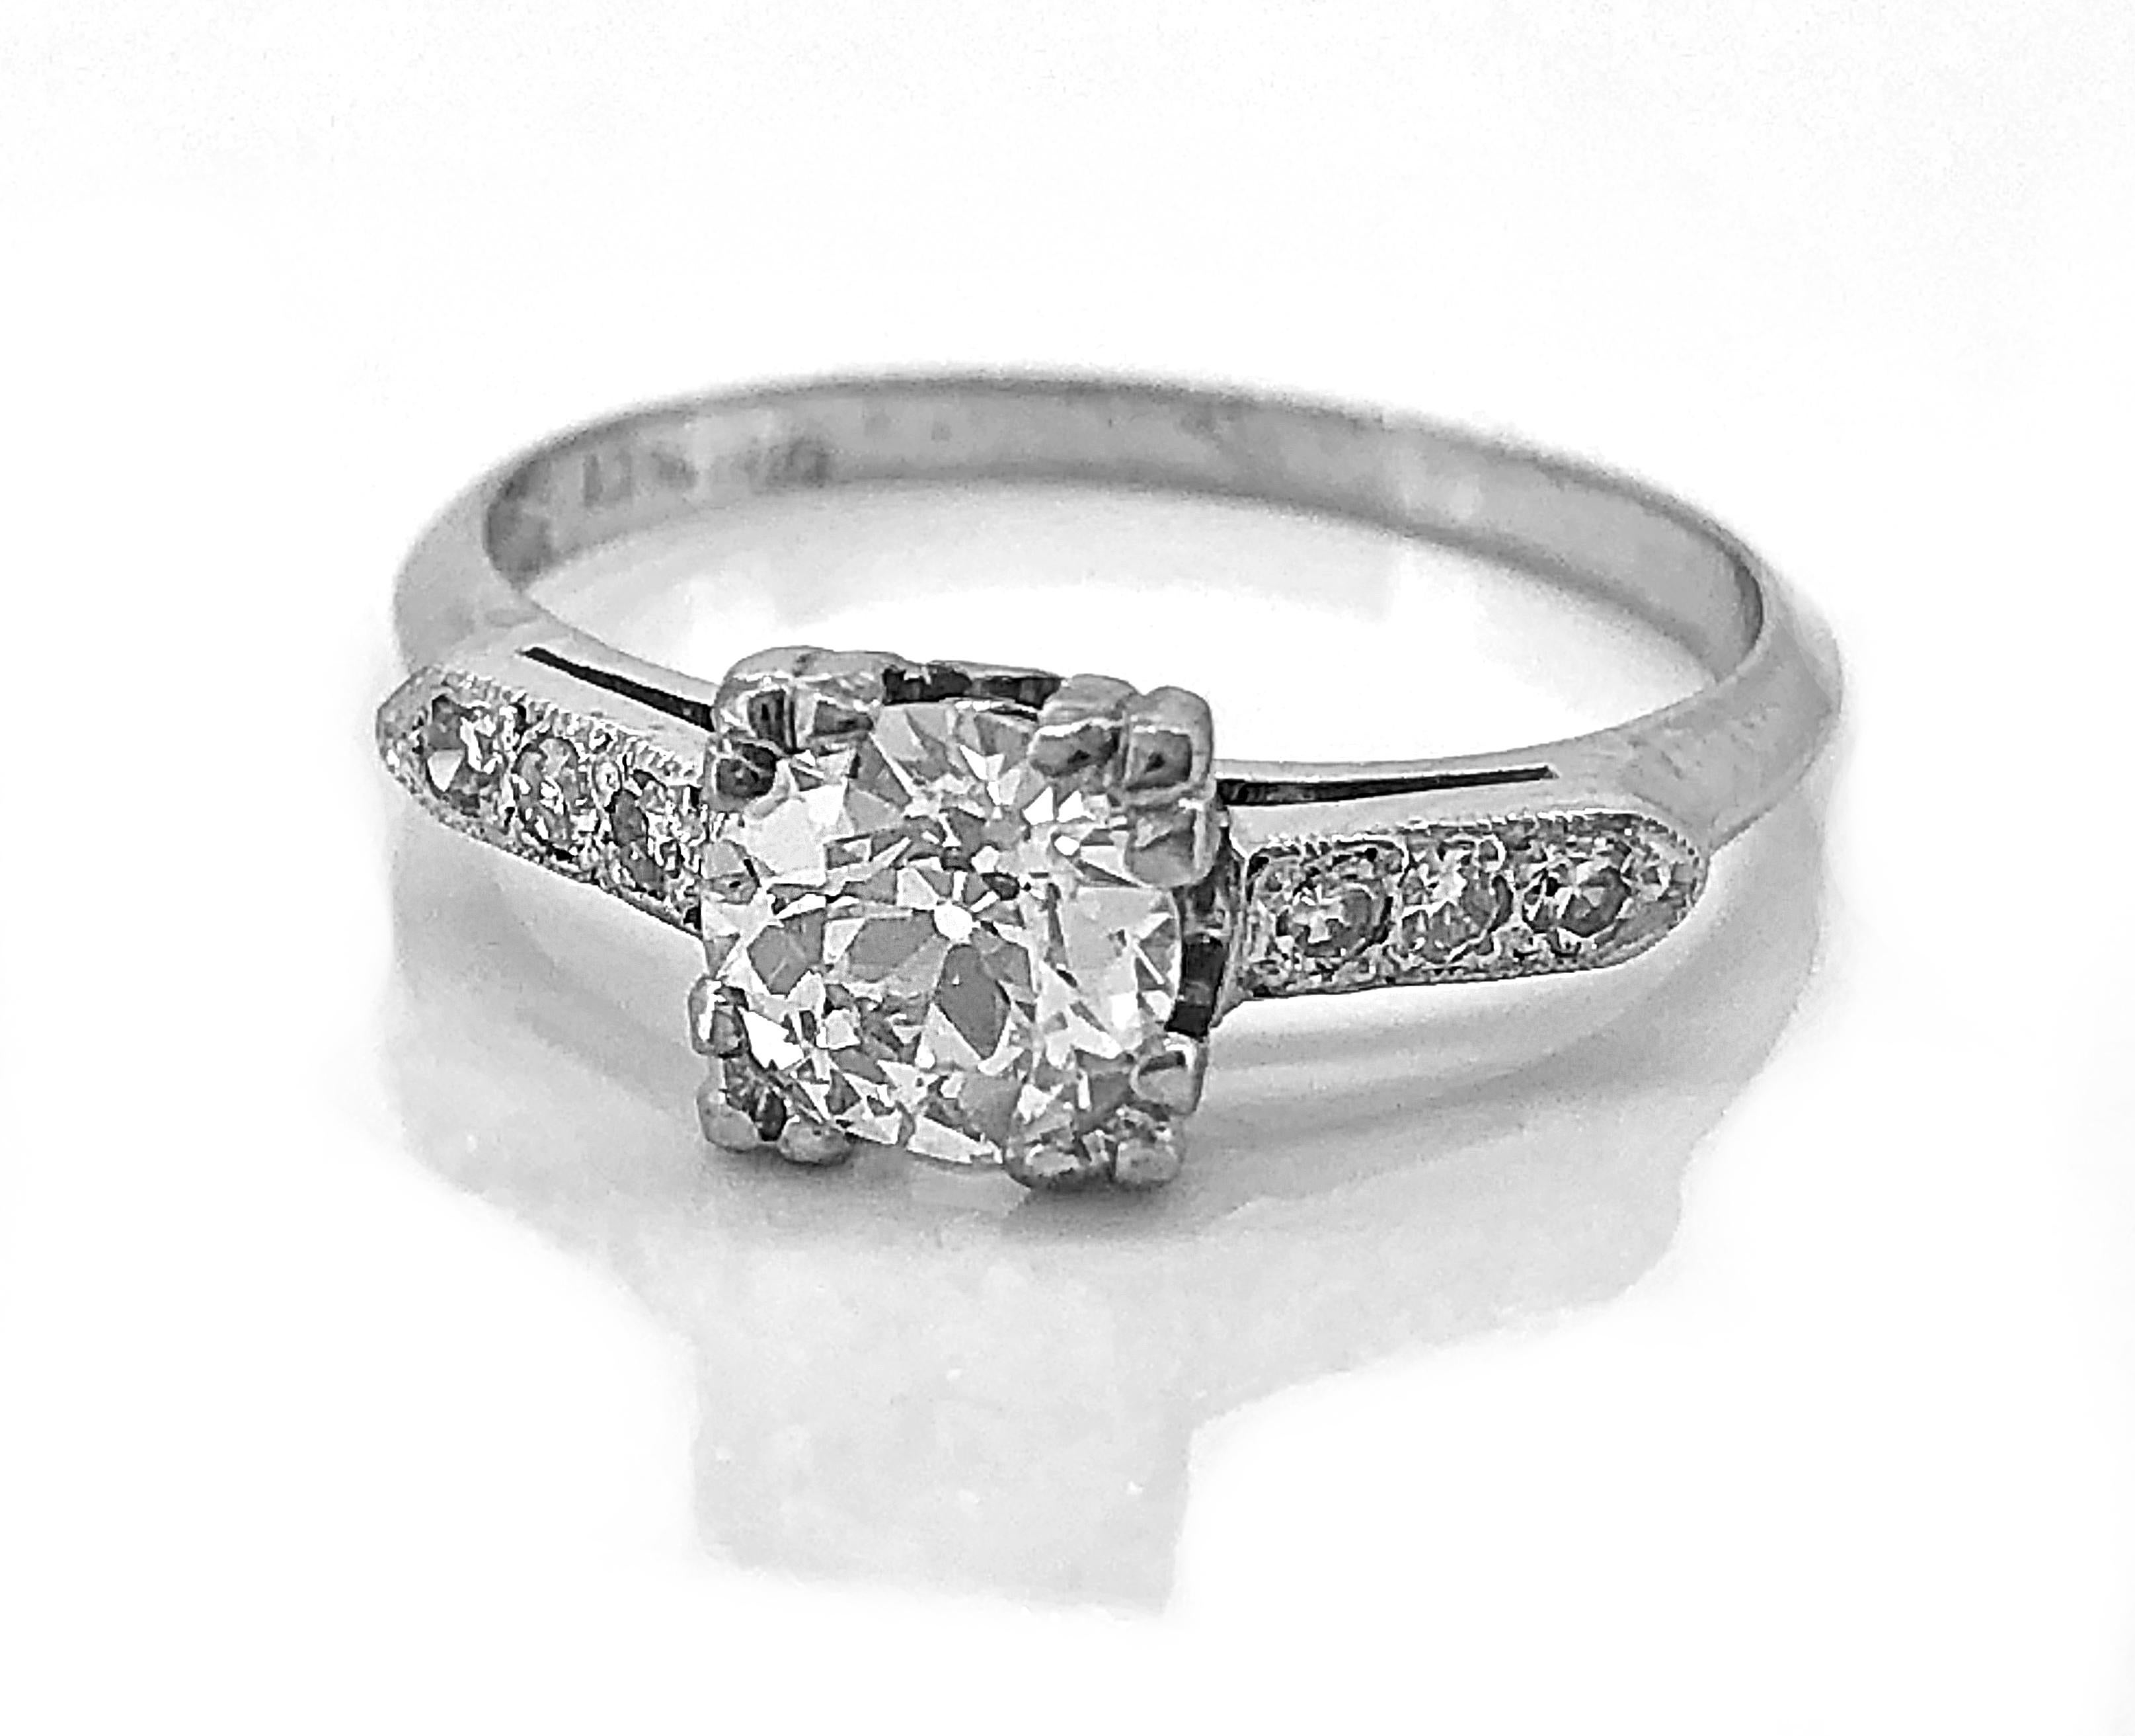 An outstanding Art Deco antique engagement ring crafted in platinum that features a .62ct. apx. European cut center diamond with VVS2-VS1 clarity and G color. This is a very high quality diamond with a classic and traditional design. Bright and